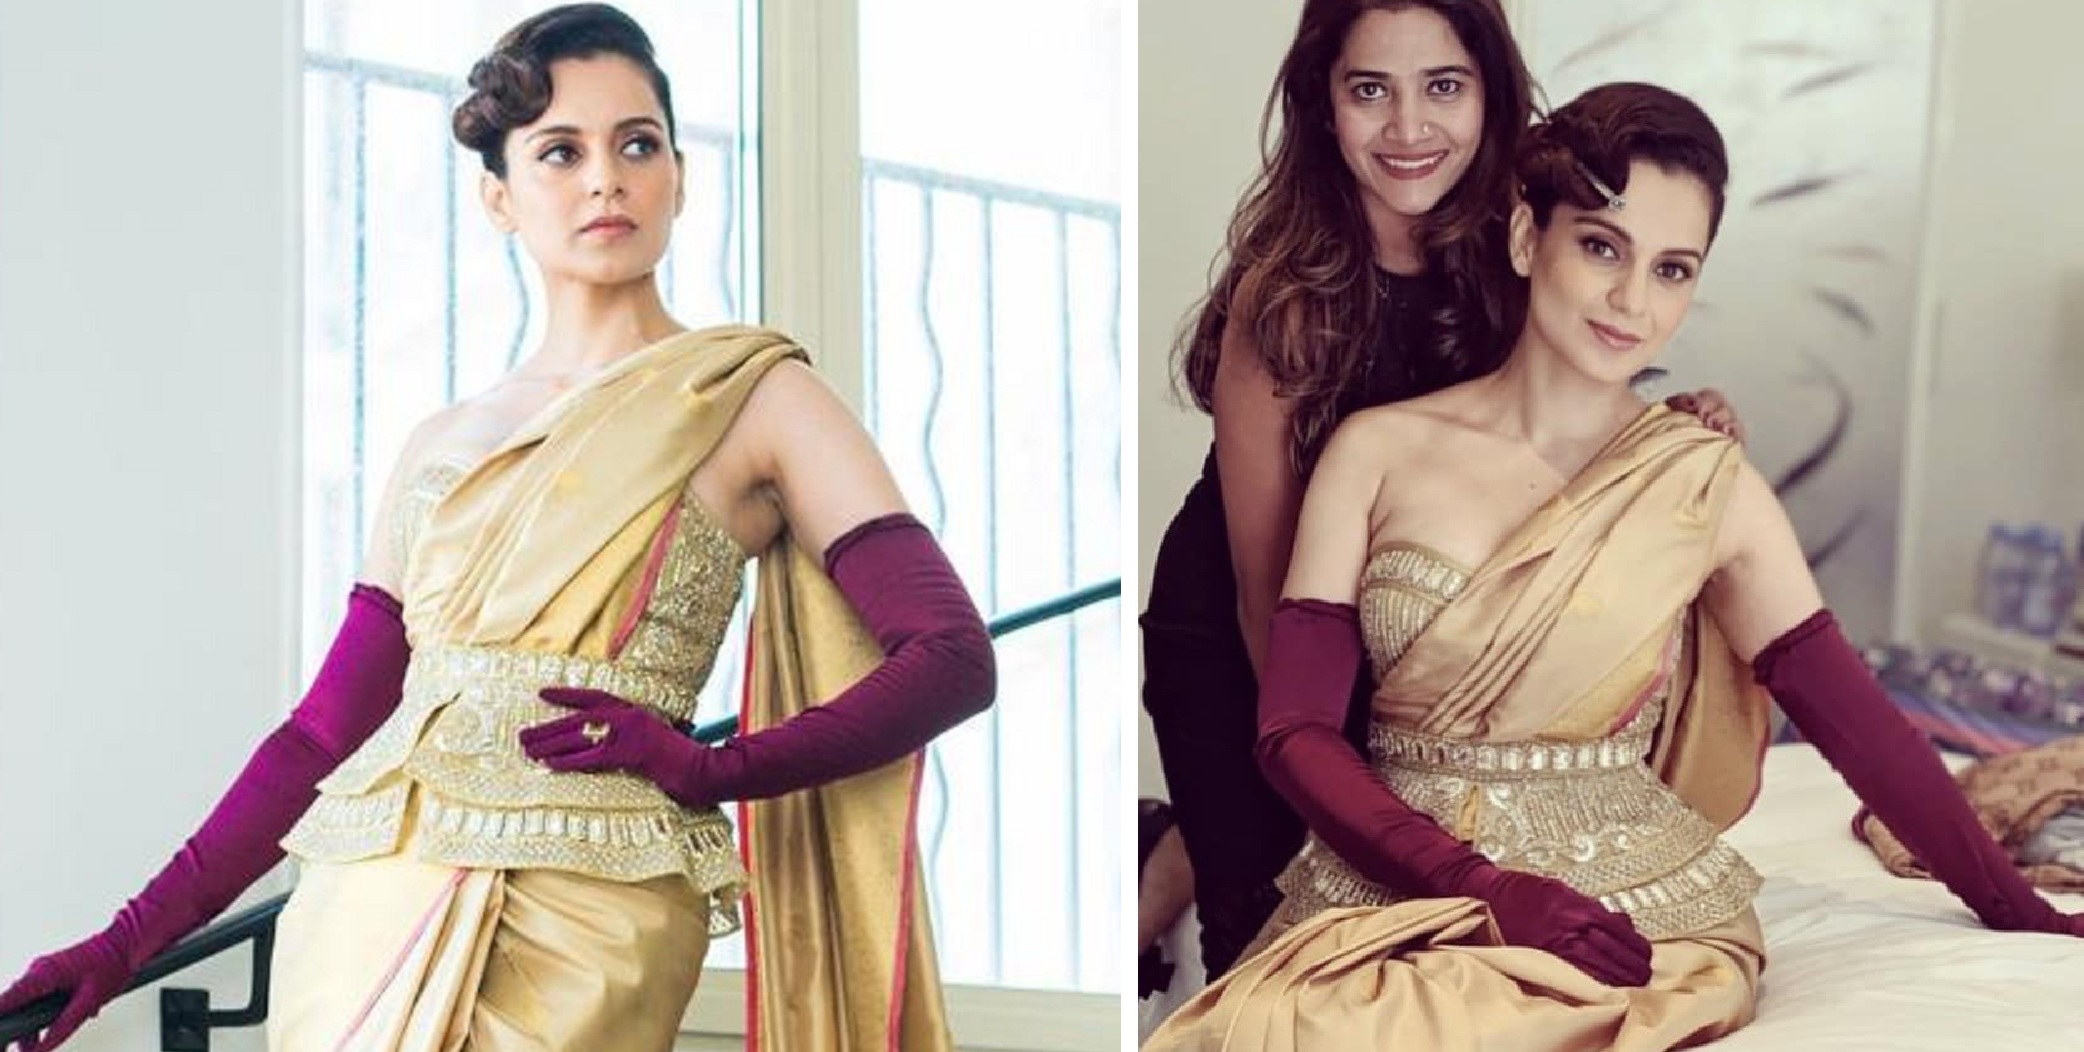 Kangana Ranaut Appears At The 2019 Cannes Festival With a Regal, Classy Look!